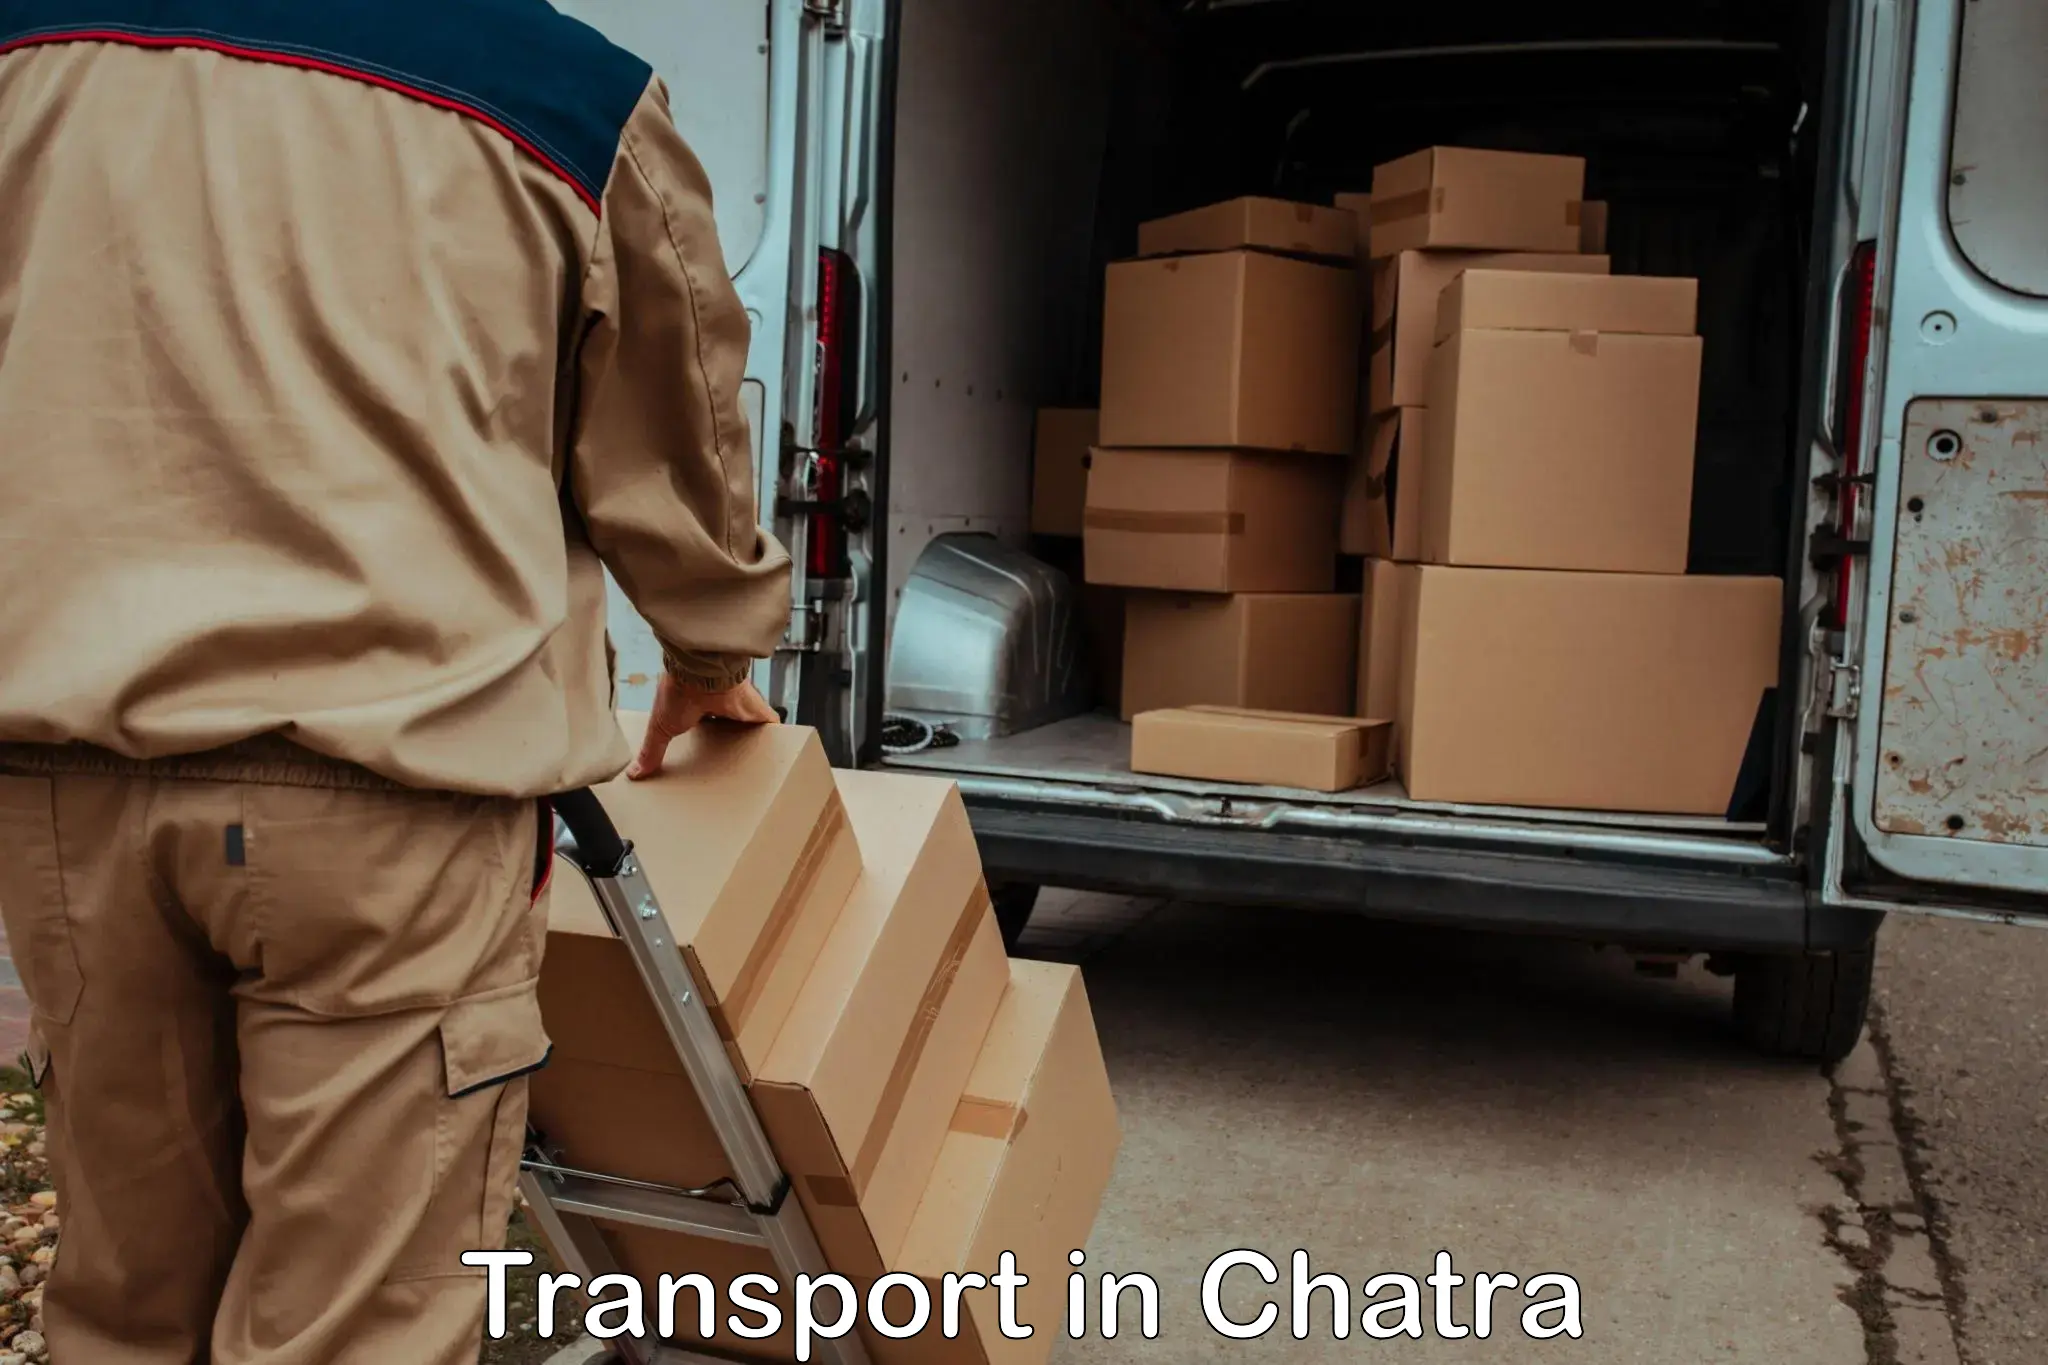 Container transport service in Chatra